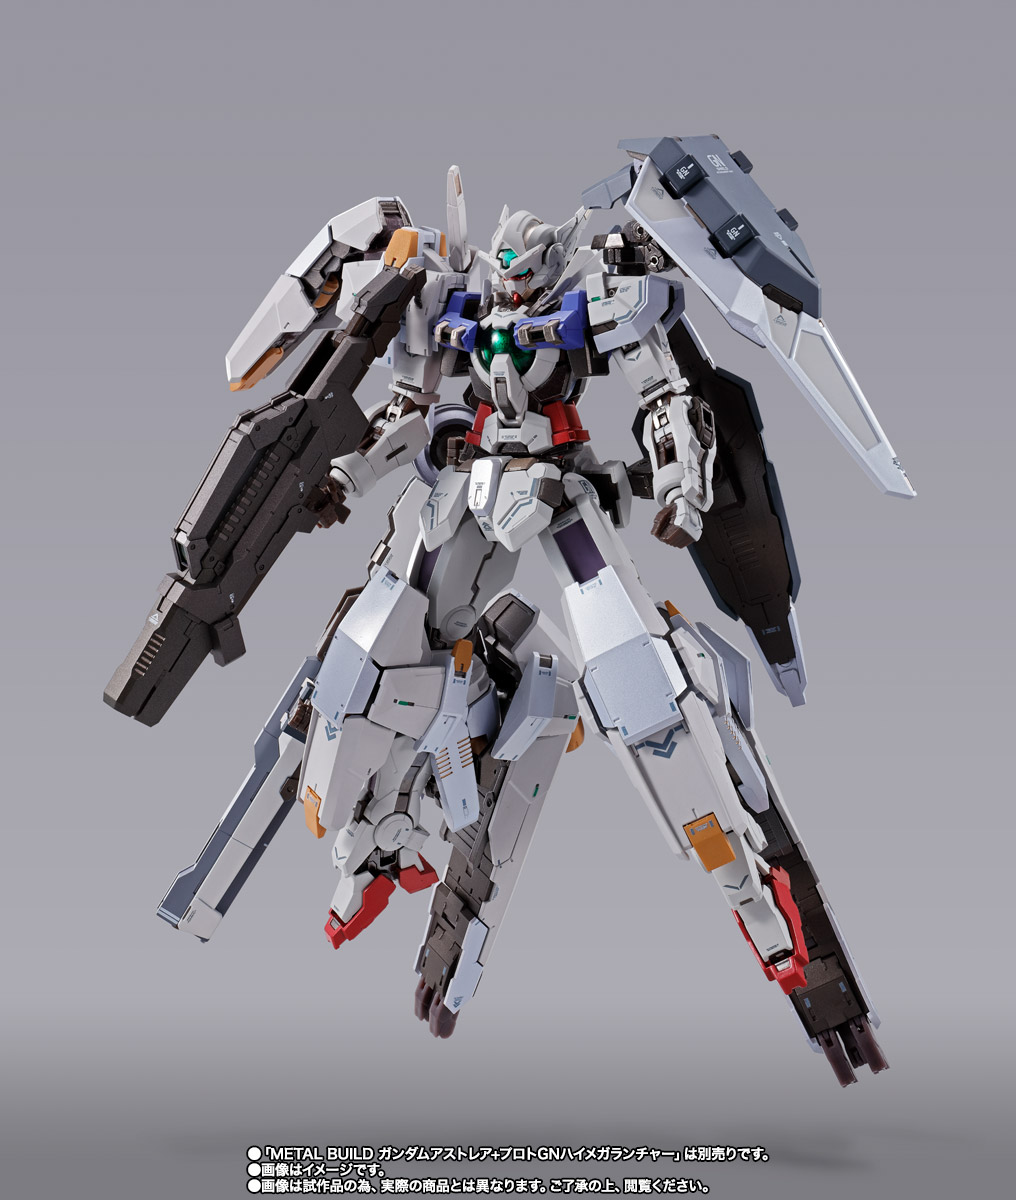 GNY-001 ガンダムアストレア（砲撃支援装備運用形態）